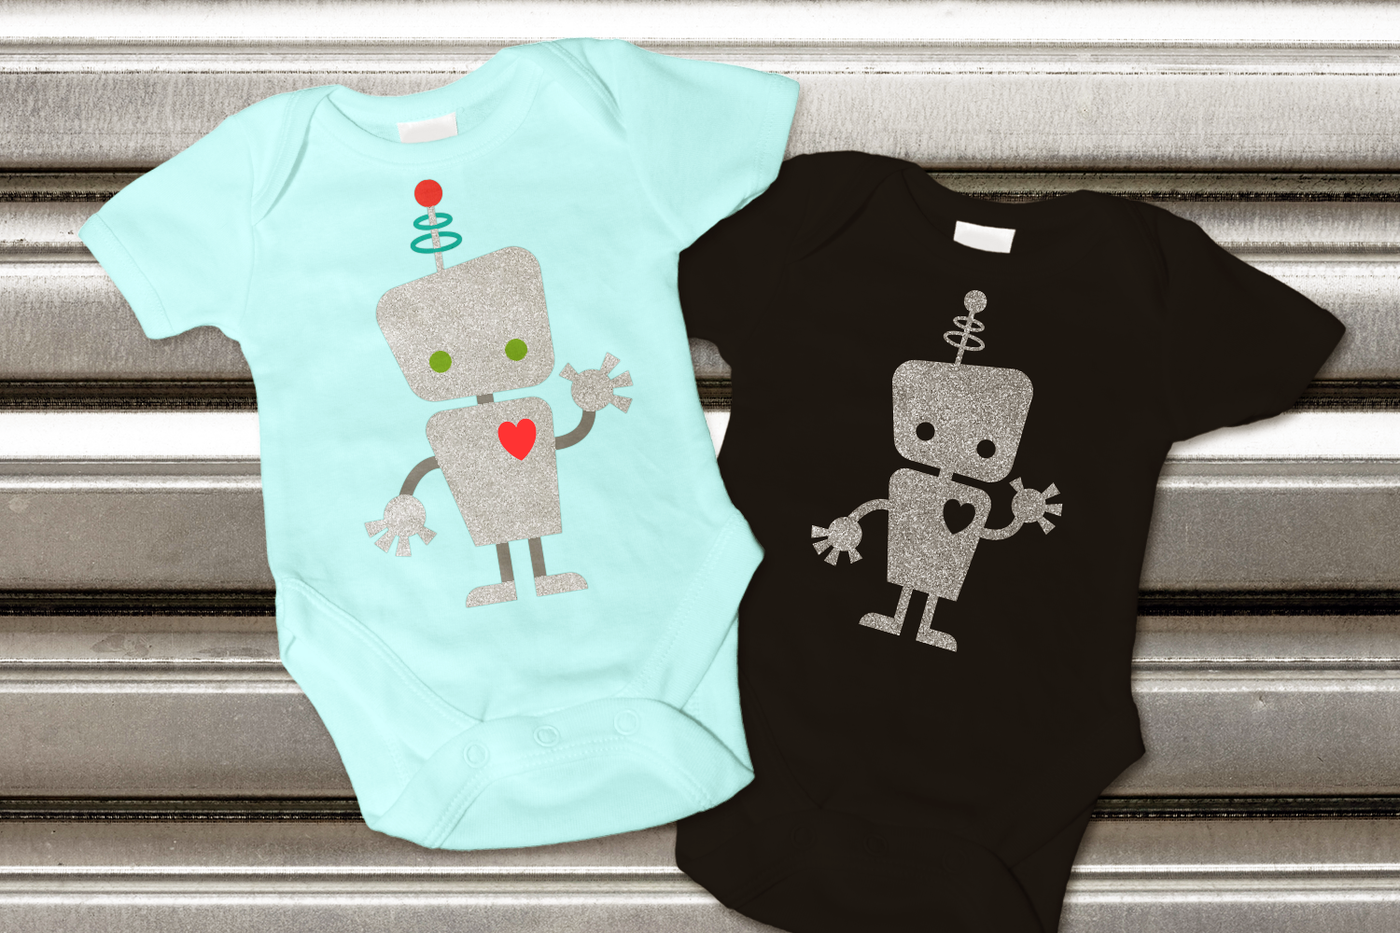 Two baby onesies with the design of a cute waving robot.